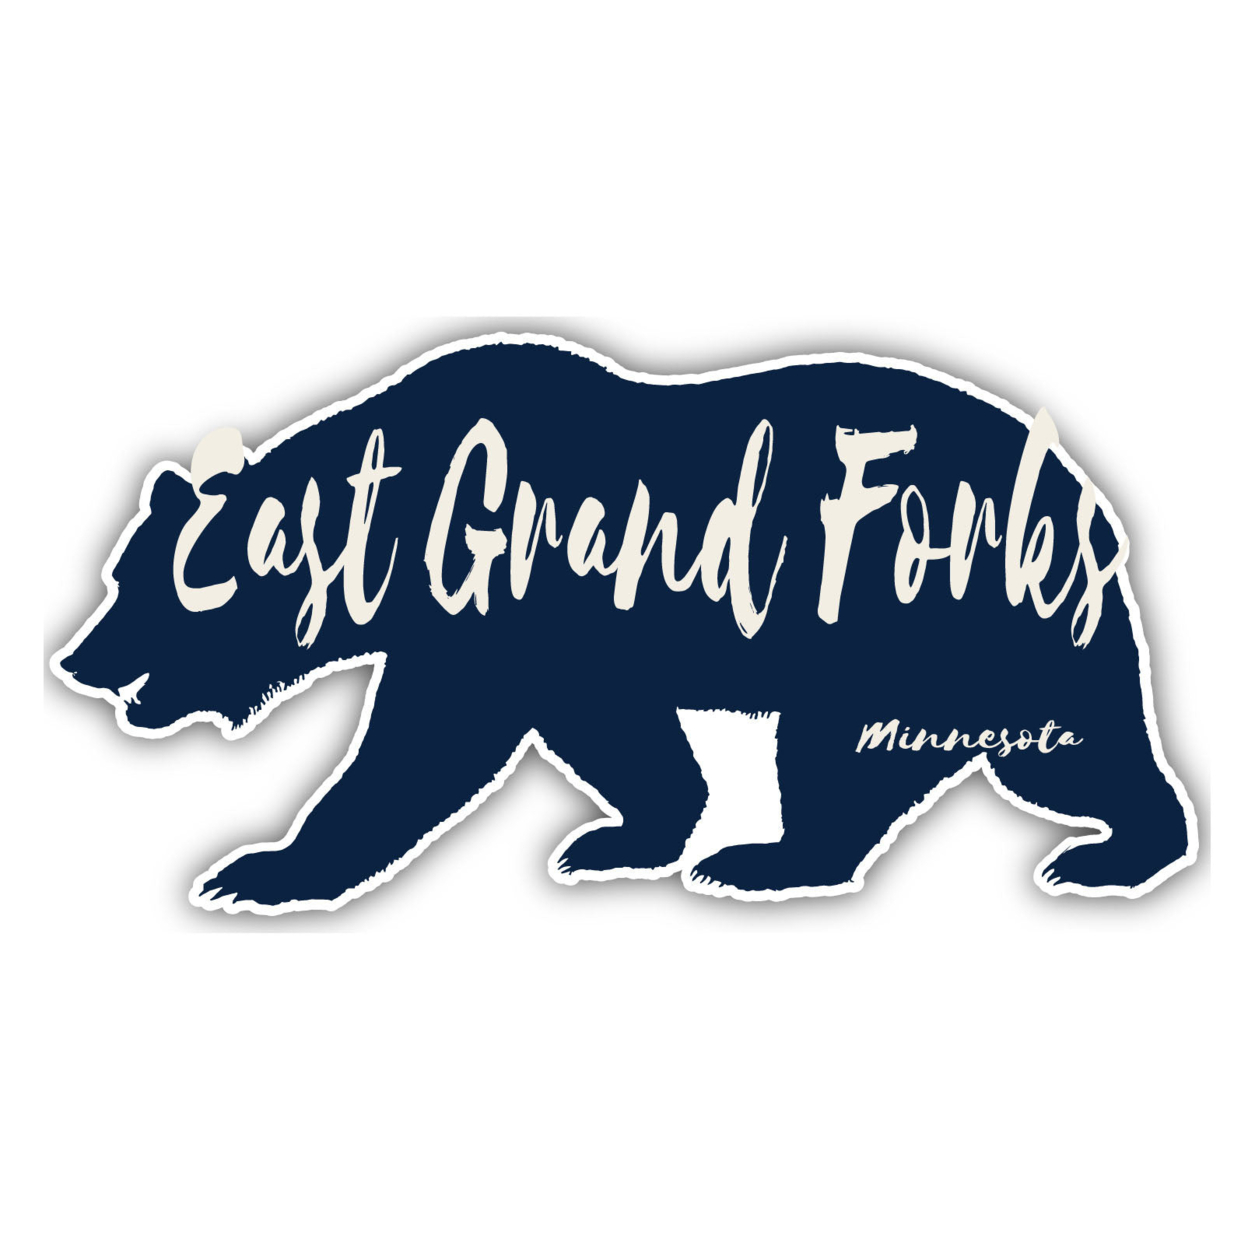 East Grand Forks Minnesota Souvenir Decorative Stickers (Choose Theme And Size) - Single Unit, 2-Inch, Tent